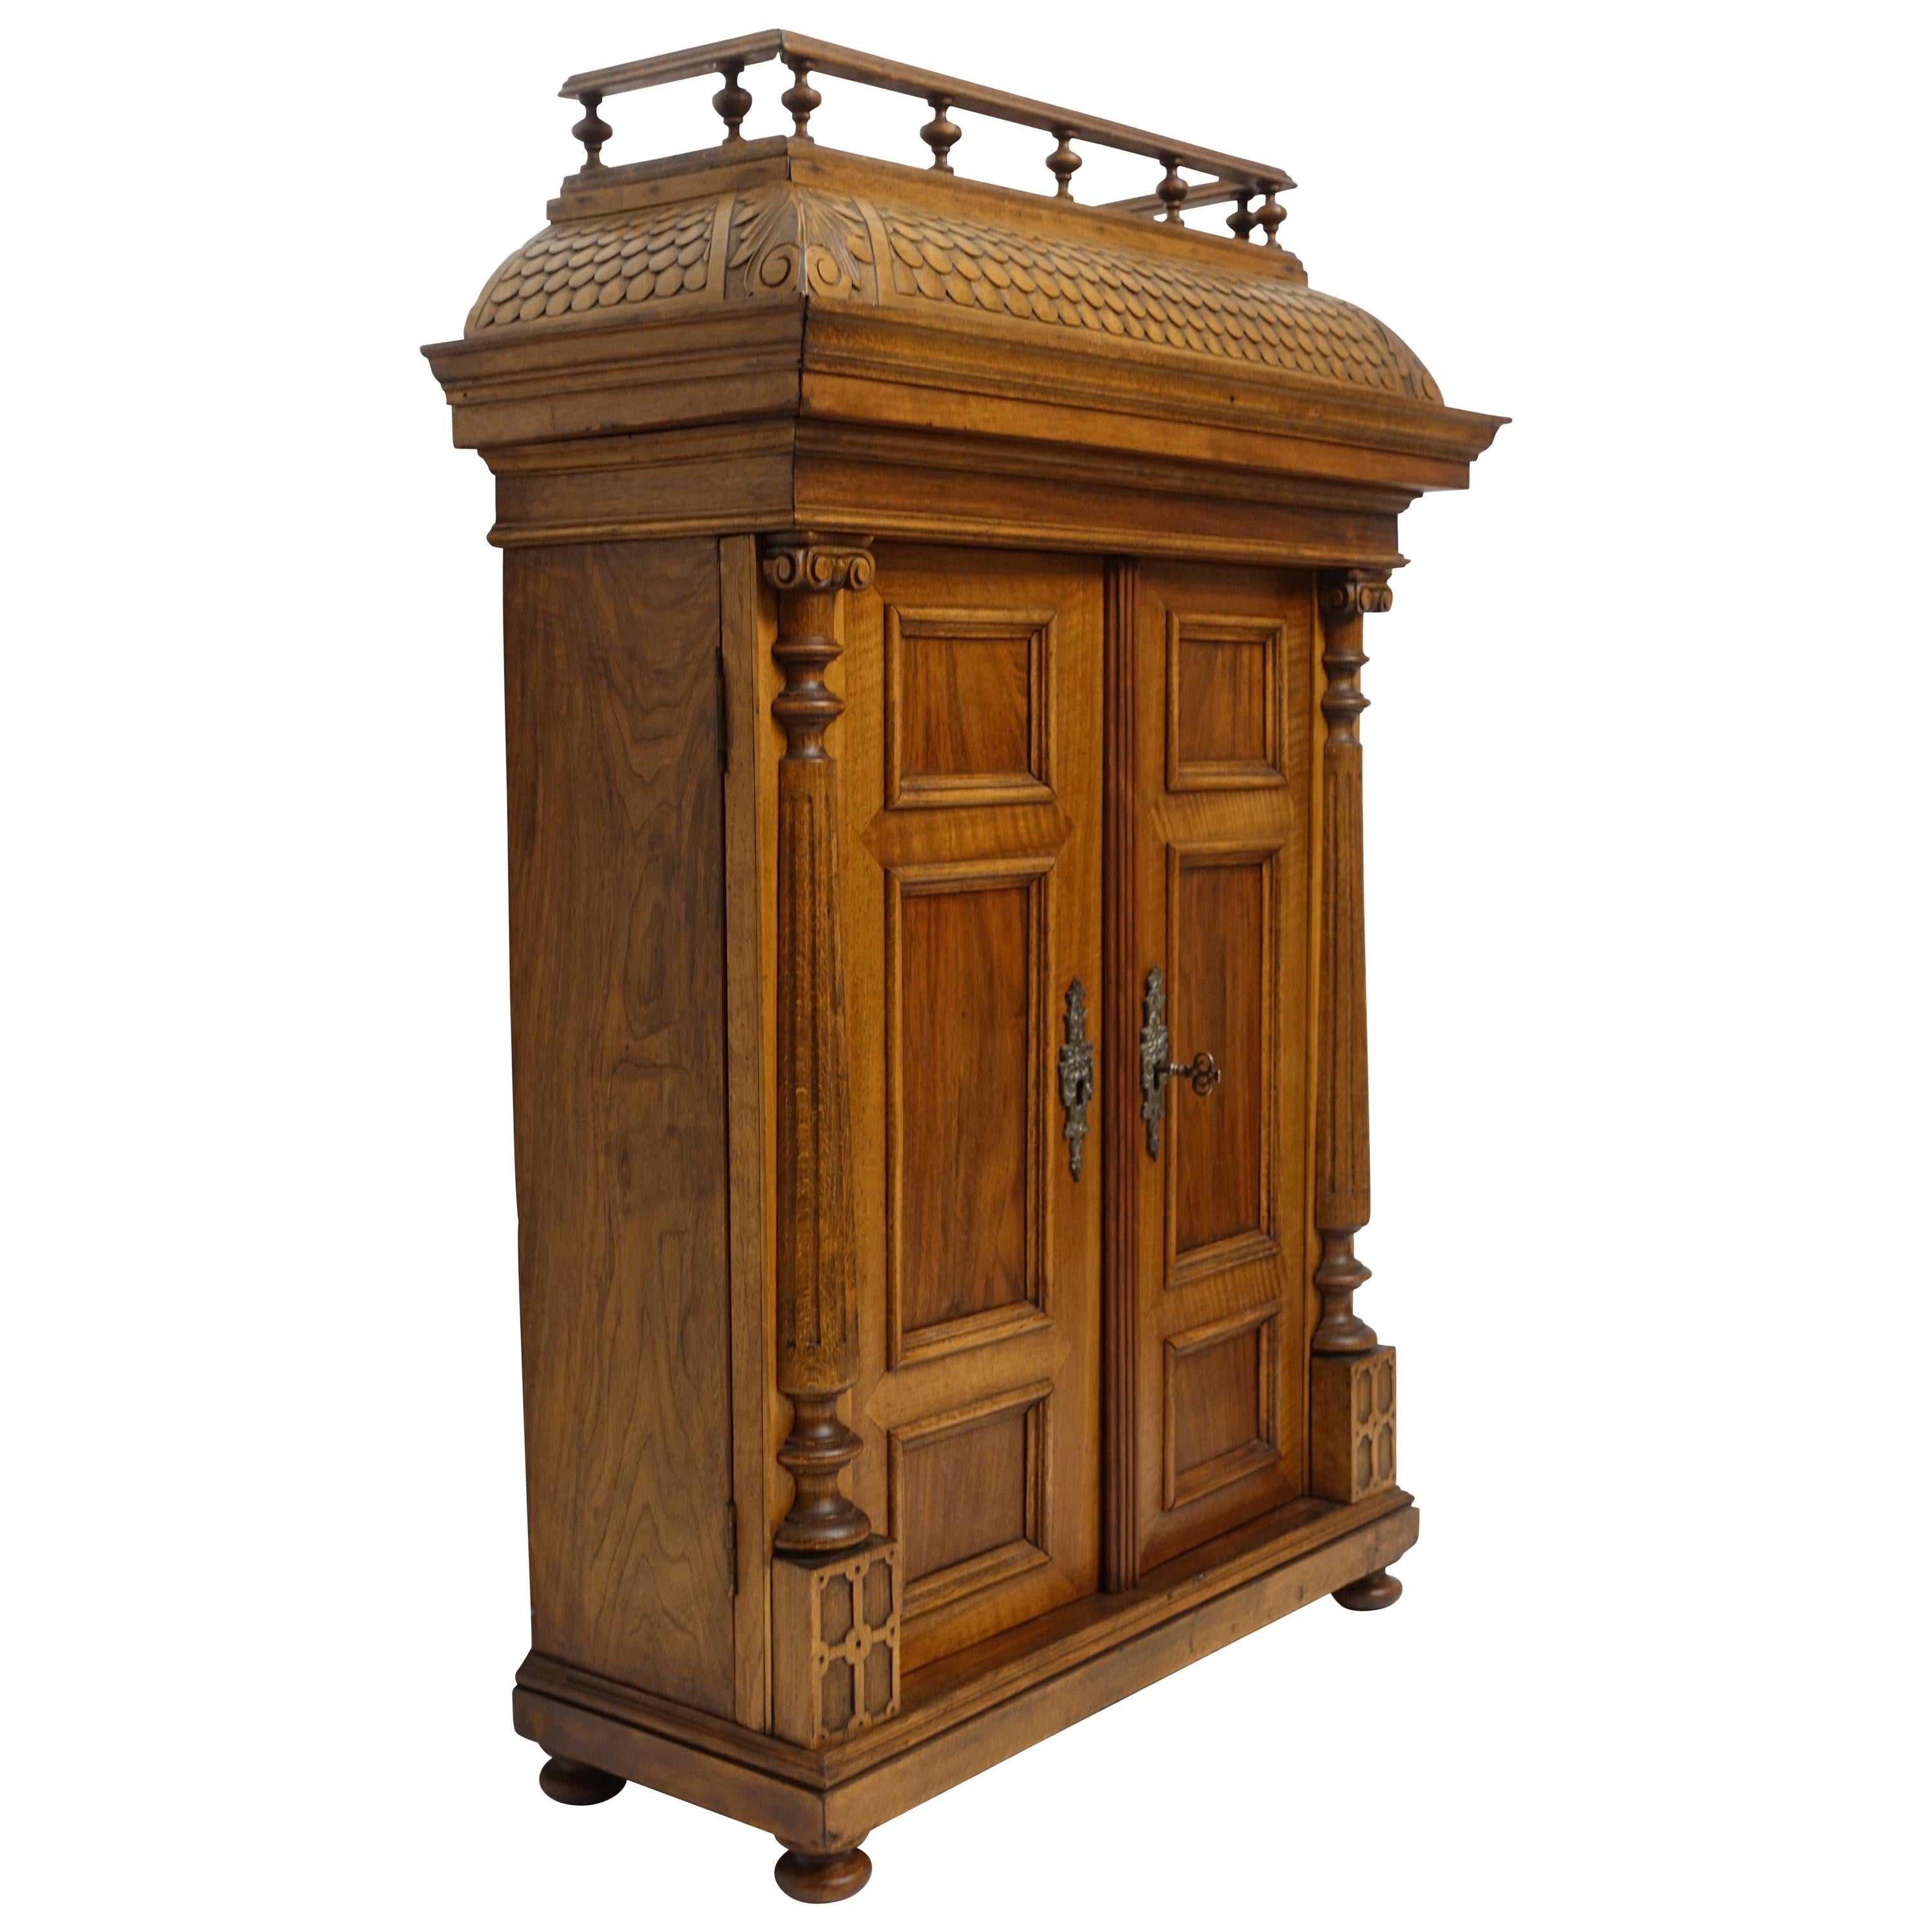 Cabinet Maker's Miniature Scale Model of a French Armoire, Late 19th Century